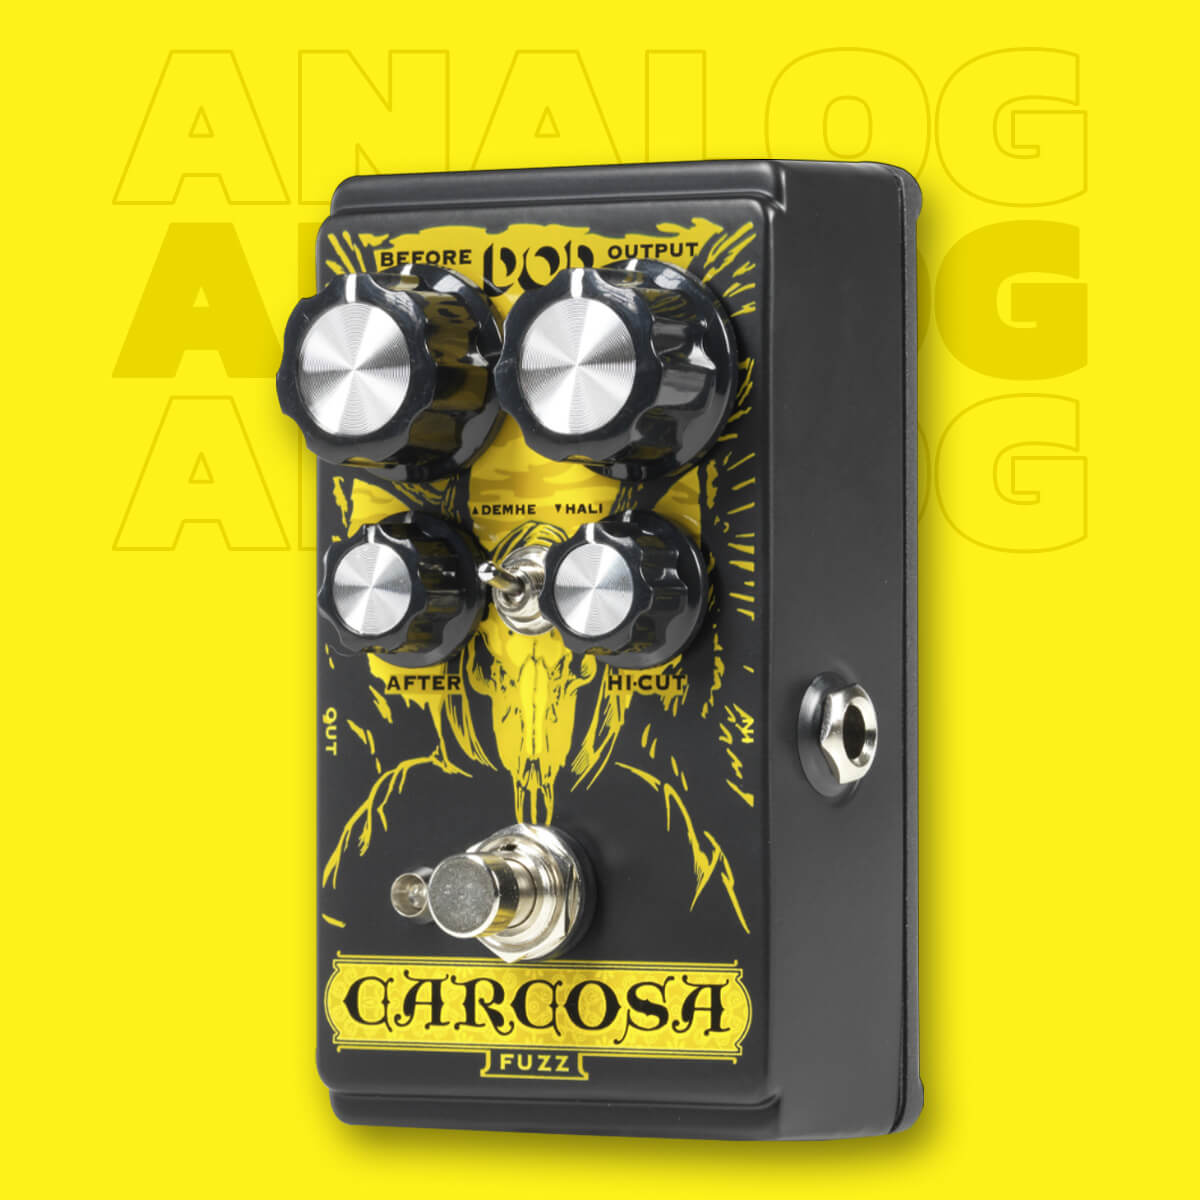 DOD Carcosa Fuzz analog fuzz guitar pedal standing in black with yellow graphics, yellow background that says 